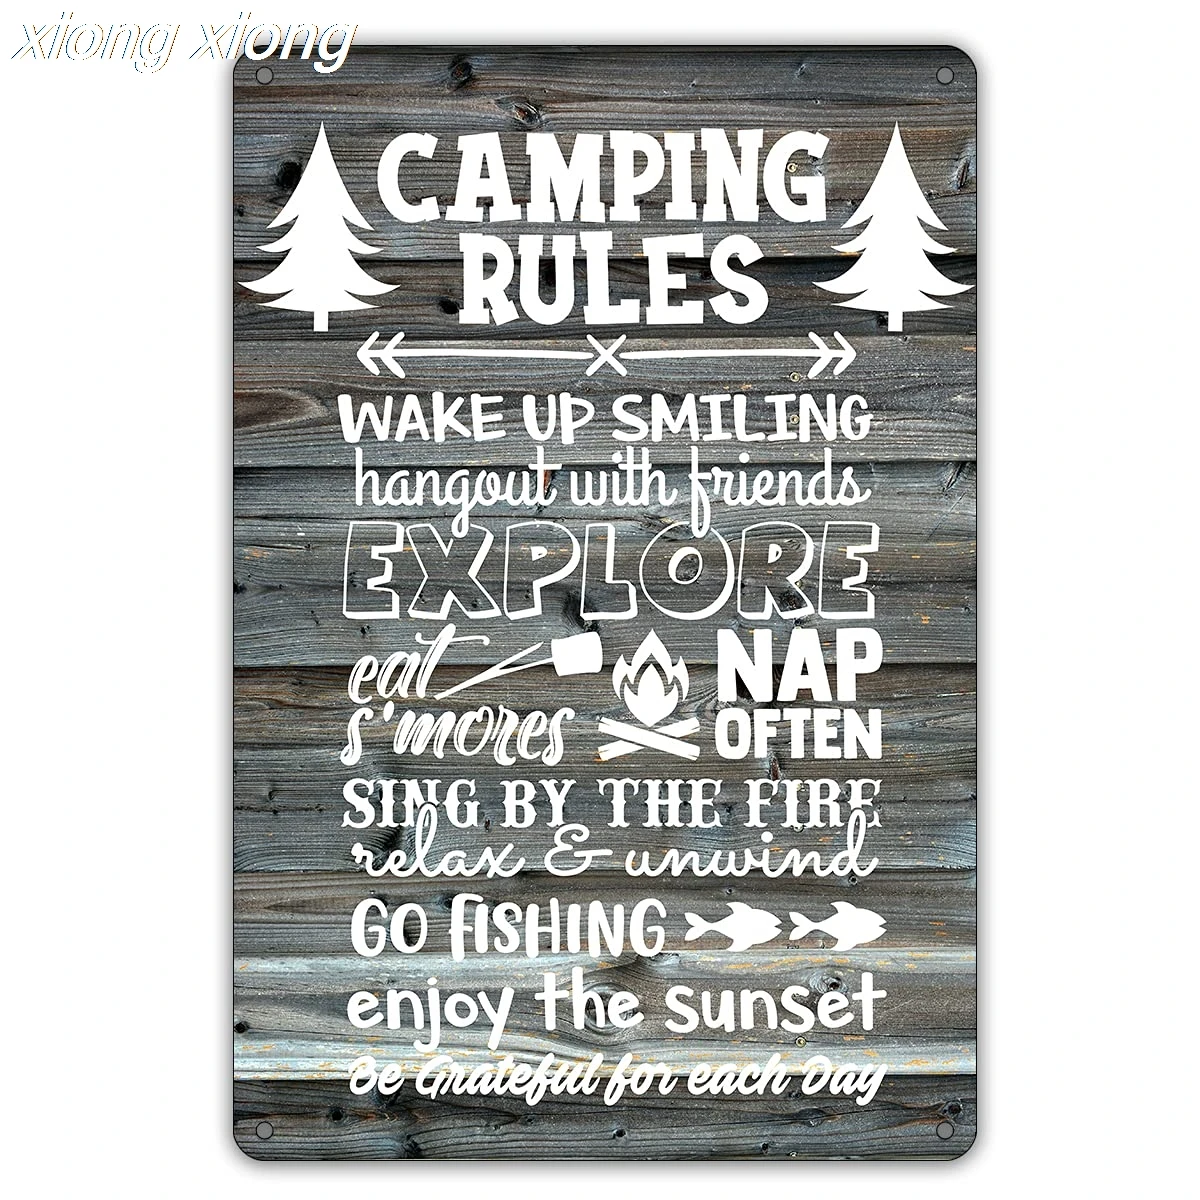 

Camping Rules Metal Tin Sign Wall Decor Farmhouse Rustic Camping Signs with Sayings for Home Garage Men Cave Yard Decor C